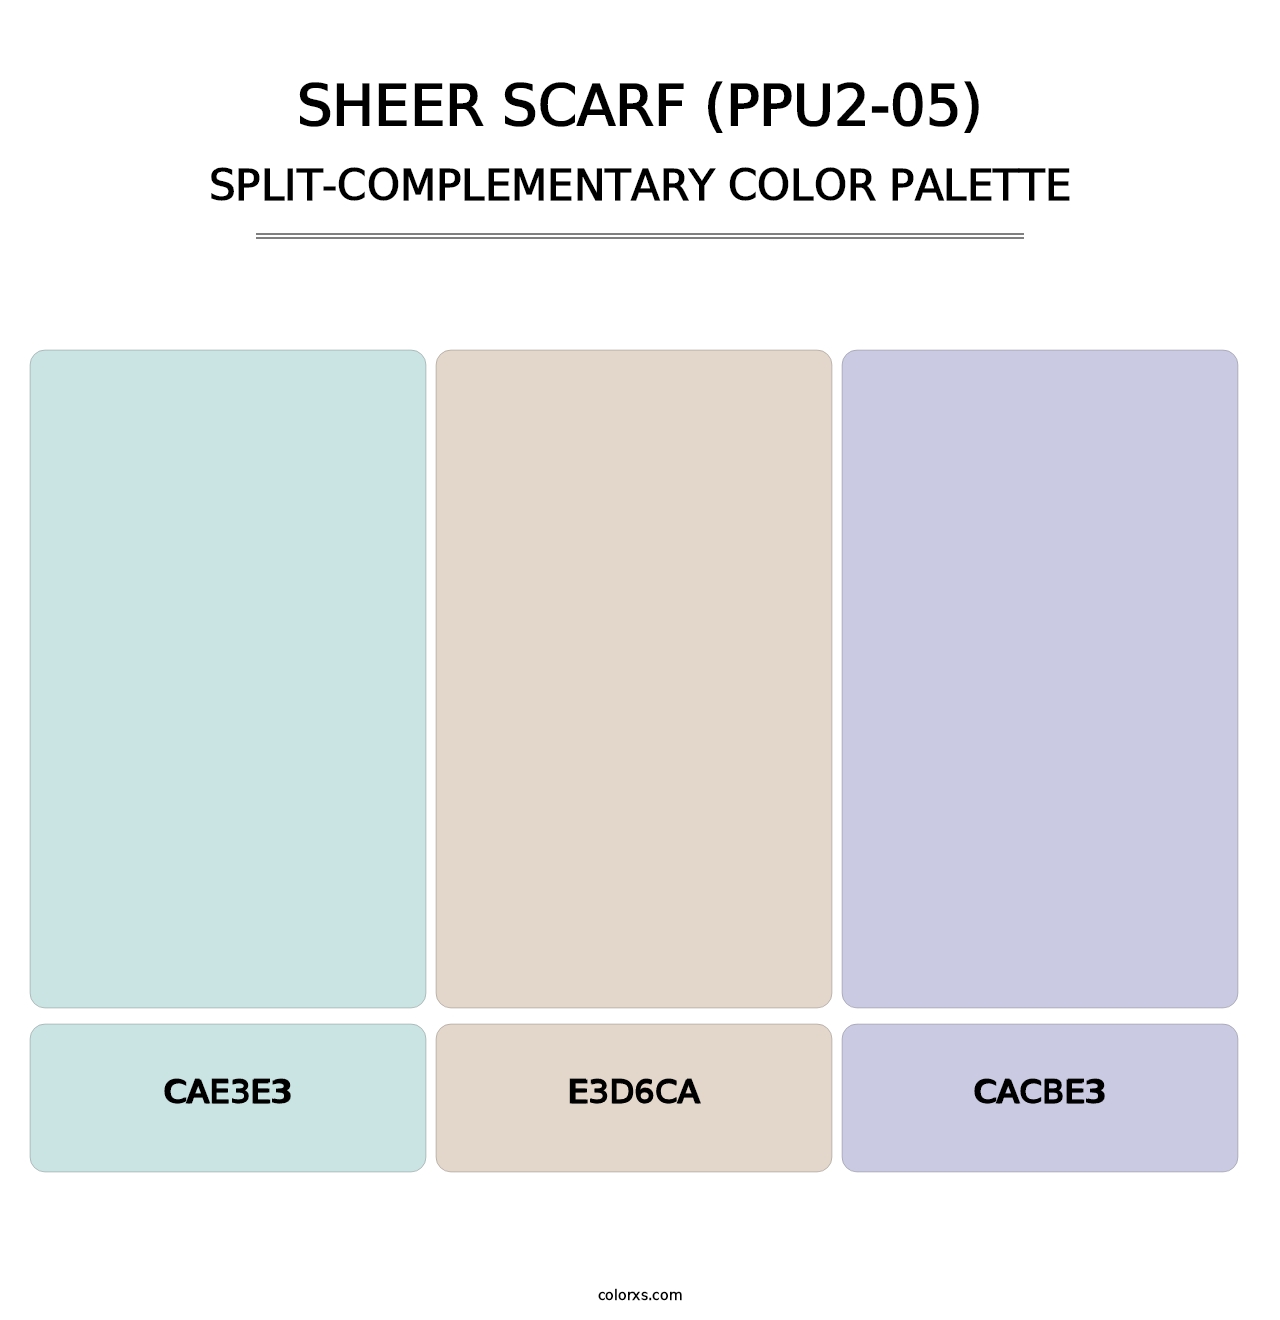 Sheer Scarf (PPU2-05) - Split-Complementary Color Palette